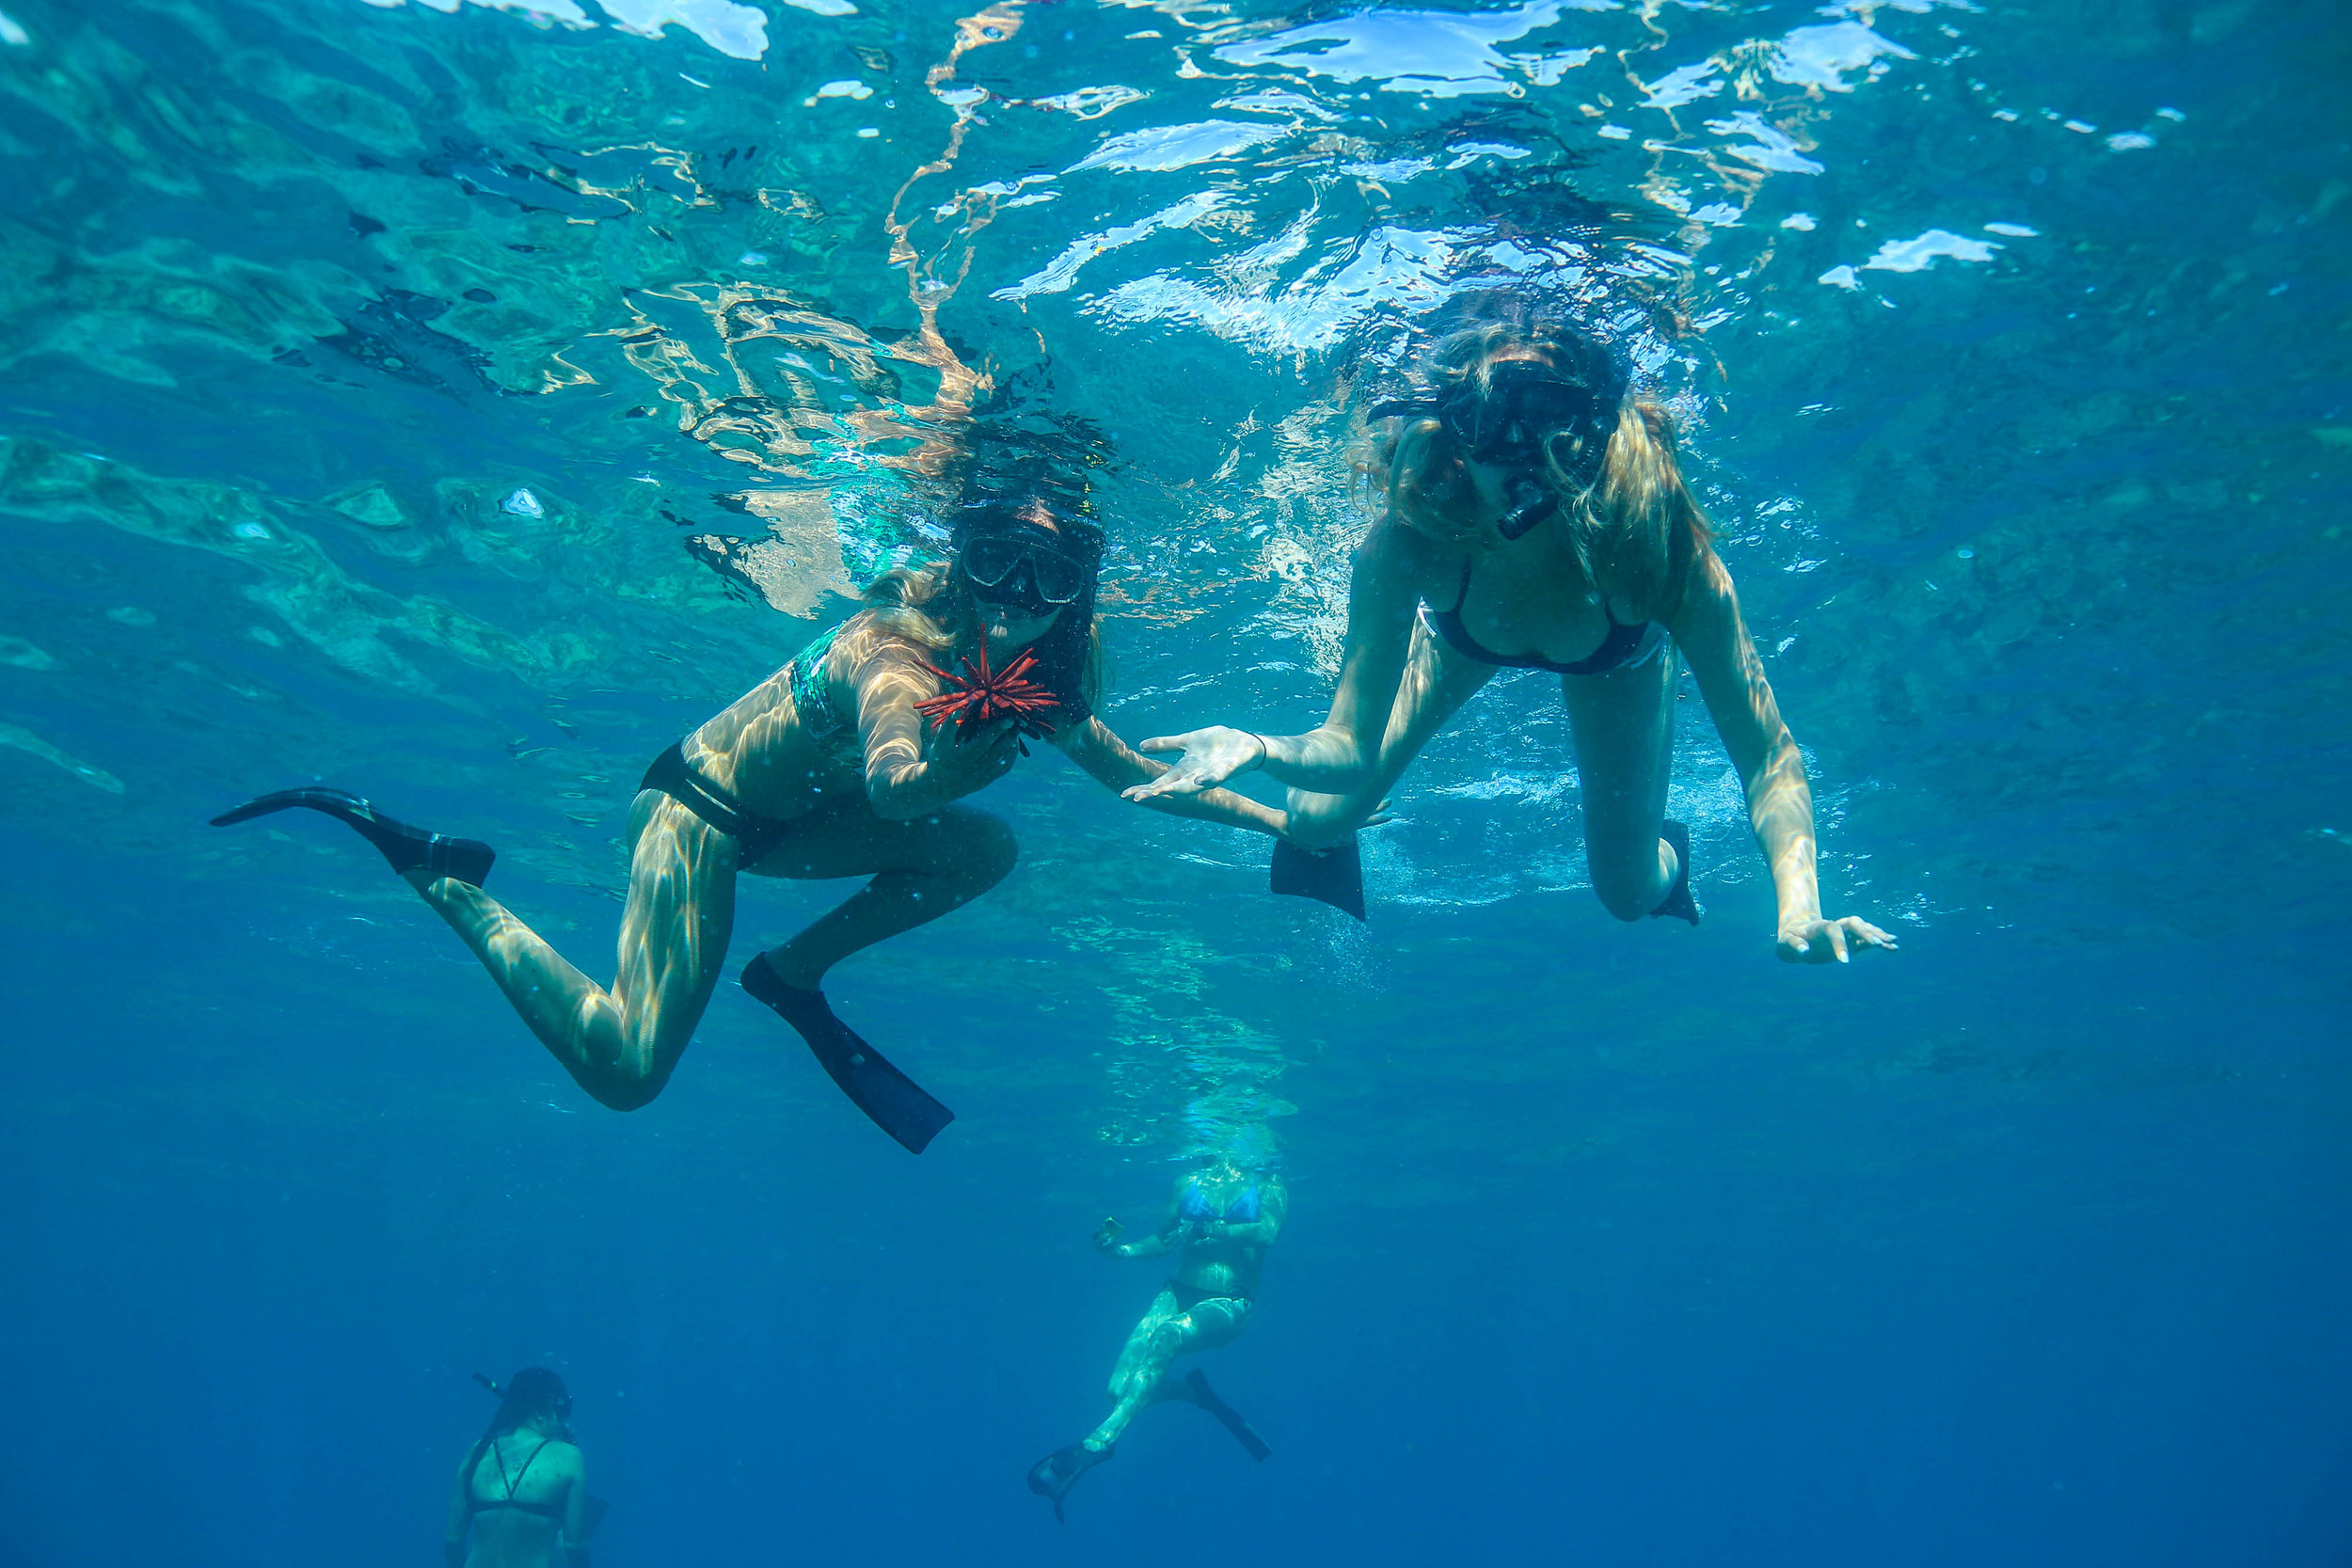 Swimming With Dolphins - 13 Things To Do On Oahu | Kaci Nicole